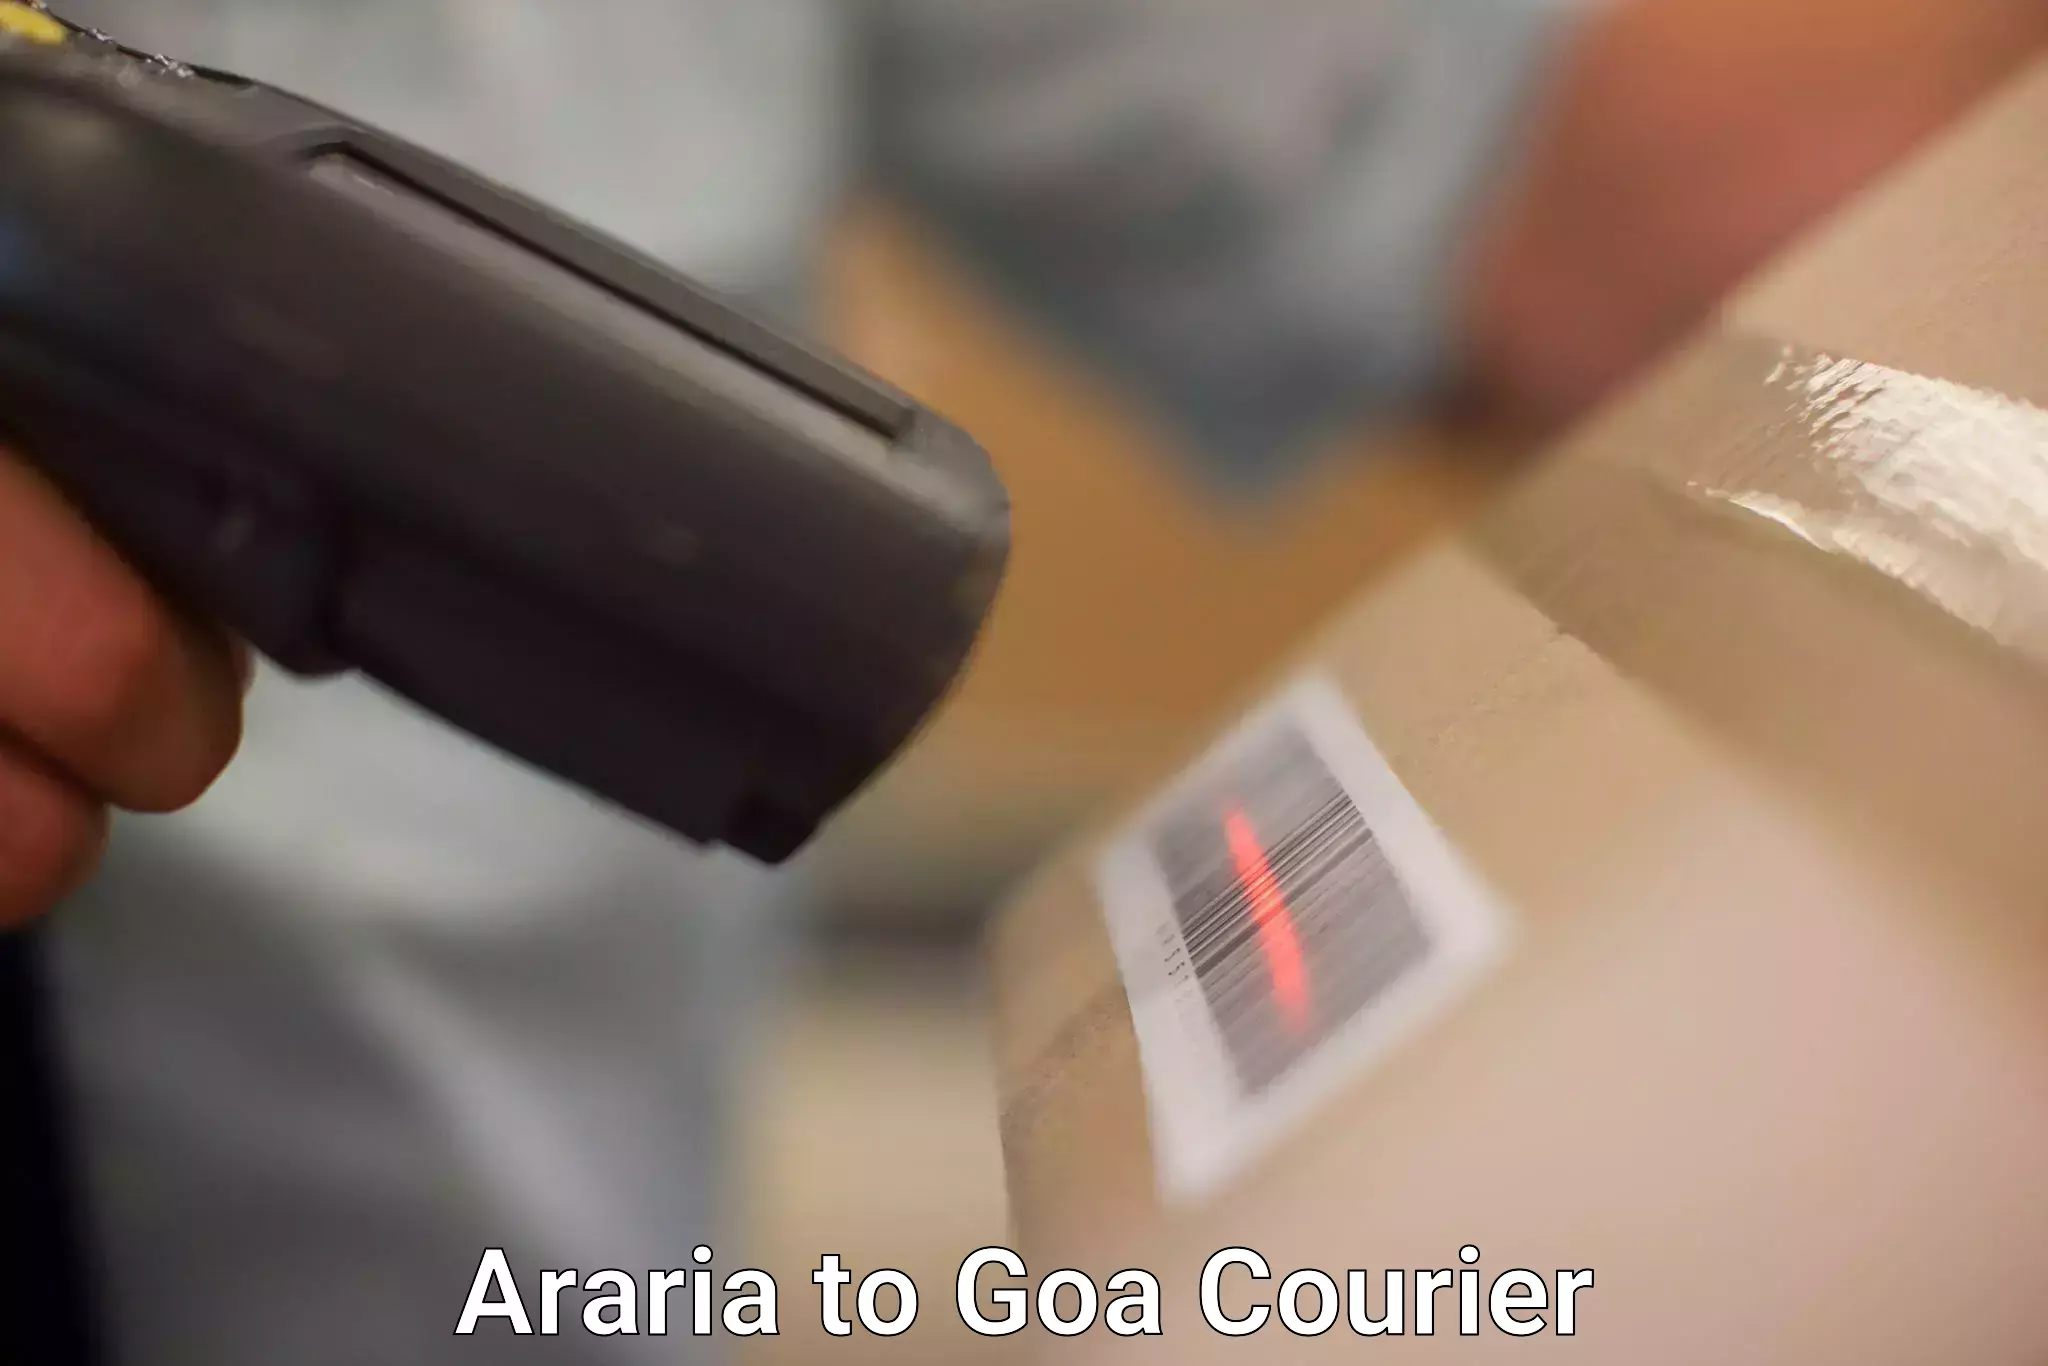 Online package tracking Araria to Panaji